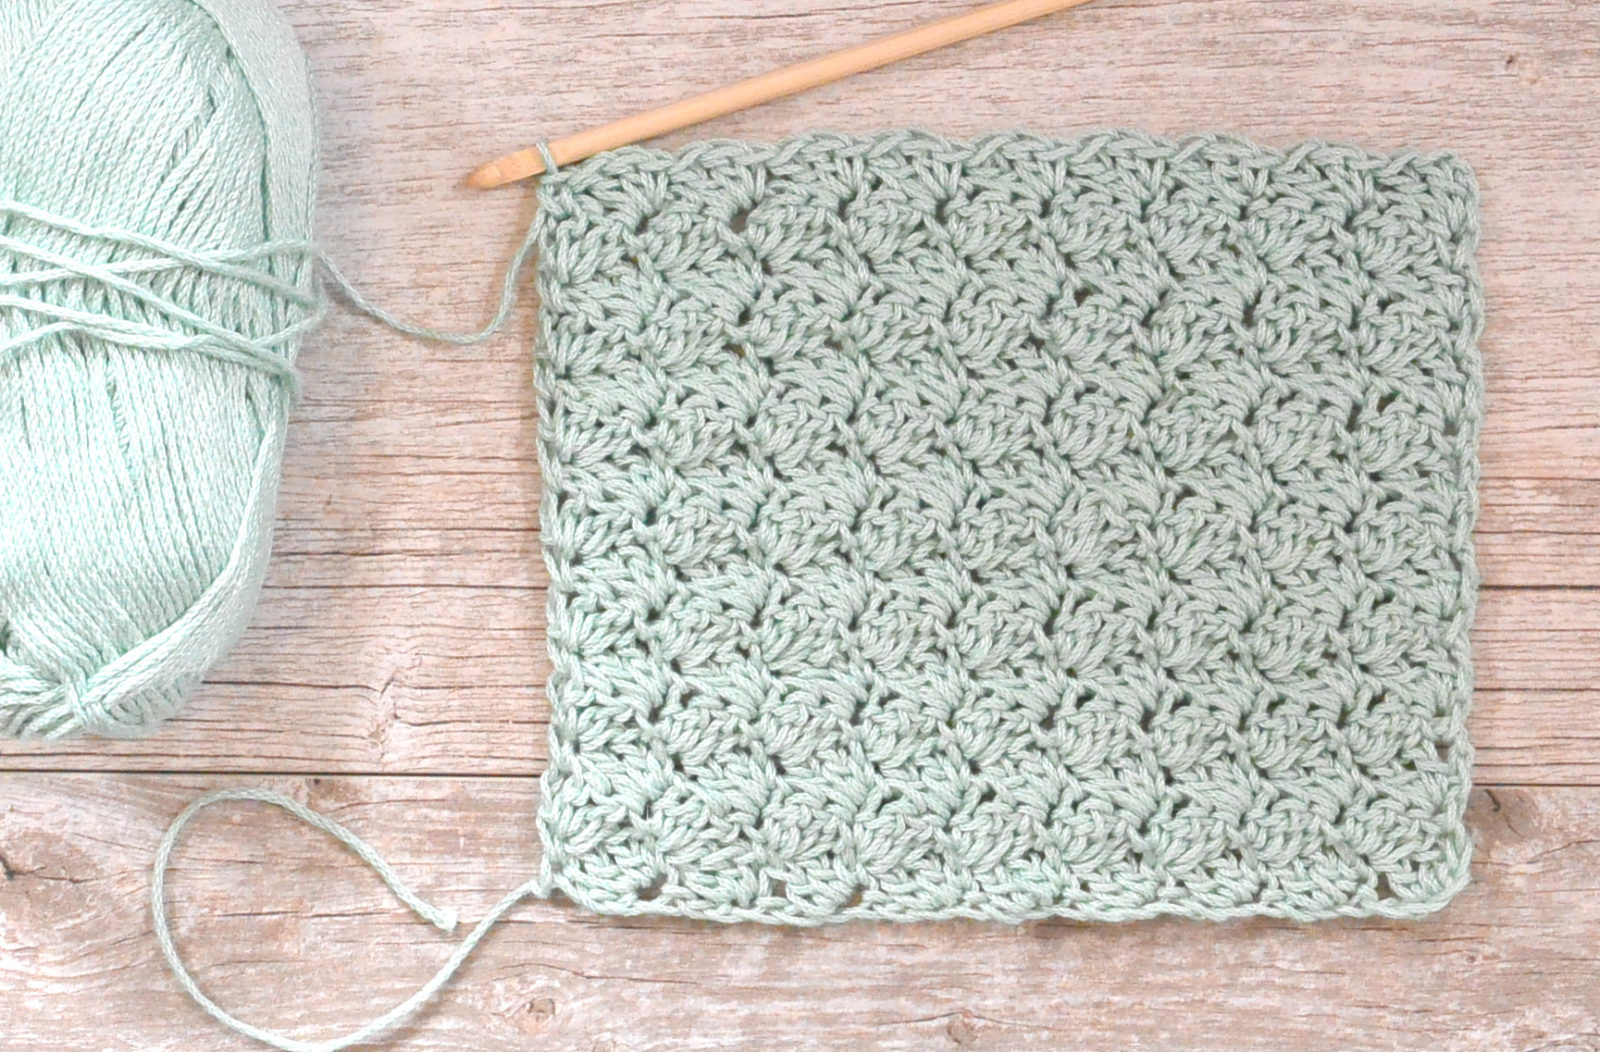 Learn to Crochet Easily - Step-by-Step Tutorial for Beginners  Crochet for  beginners blanket, Easy crochet stitches, Easy beginner crochet patterns